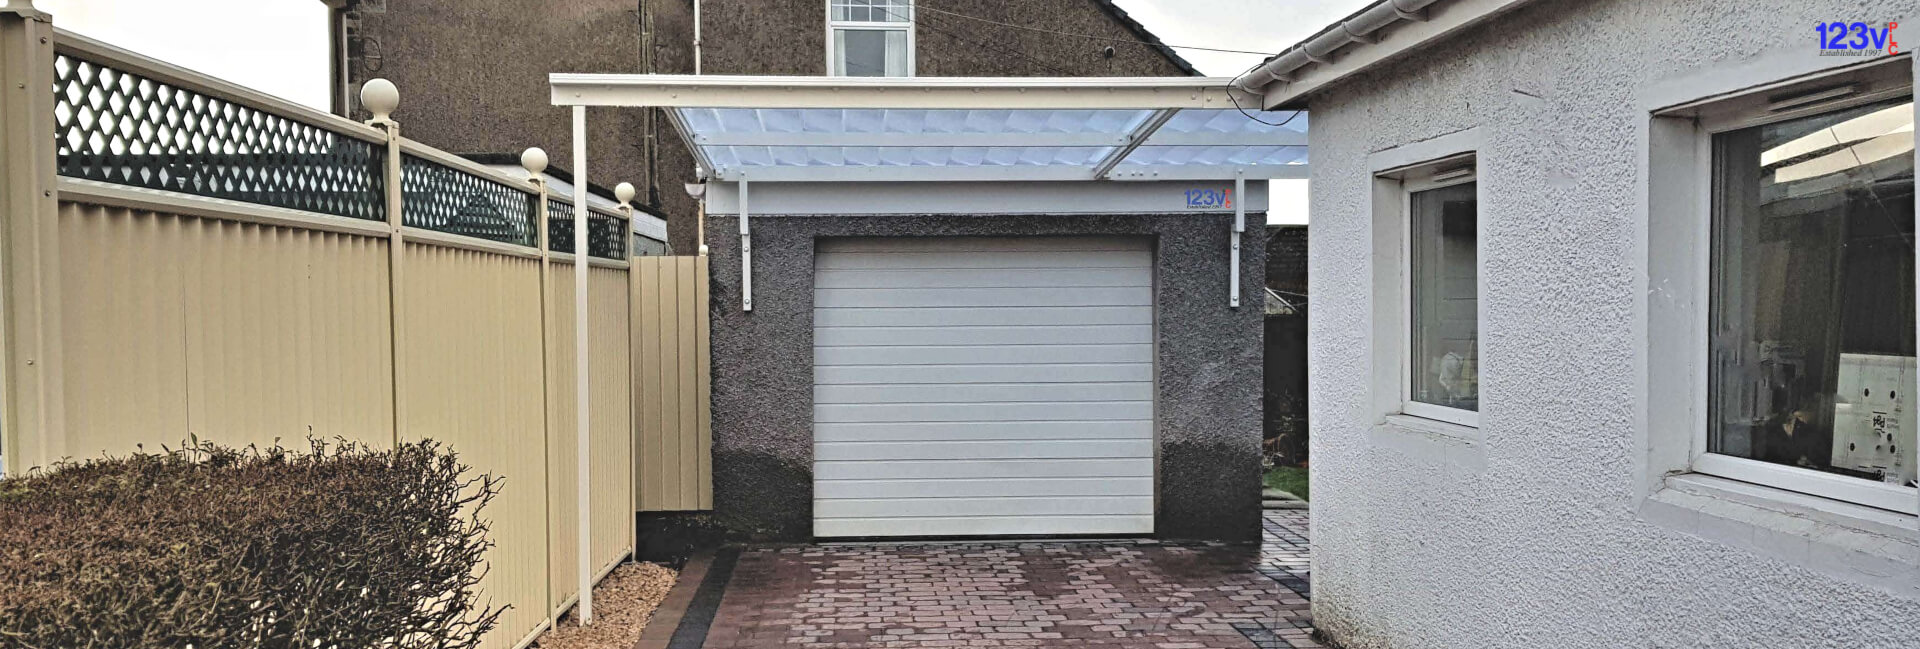 123v Traditional Carport Disabled Access Glasgow Strathclyde